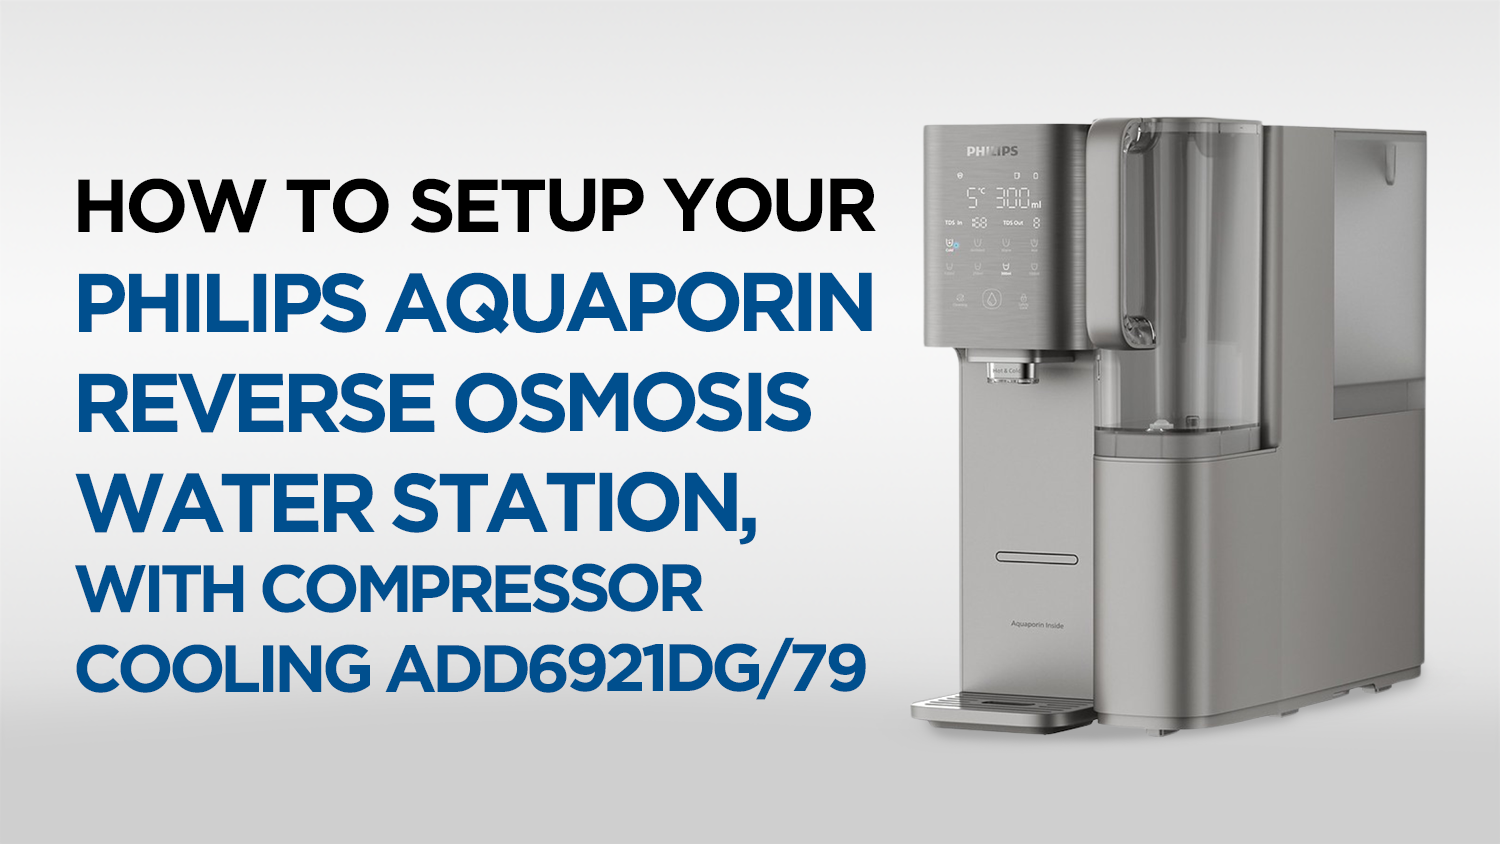 How to Set Up Your Philips Aquaporin Reverse Osmosis Water Station, with compressor cooling ADD6921DG/79